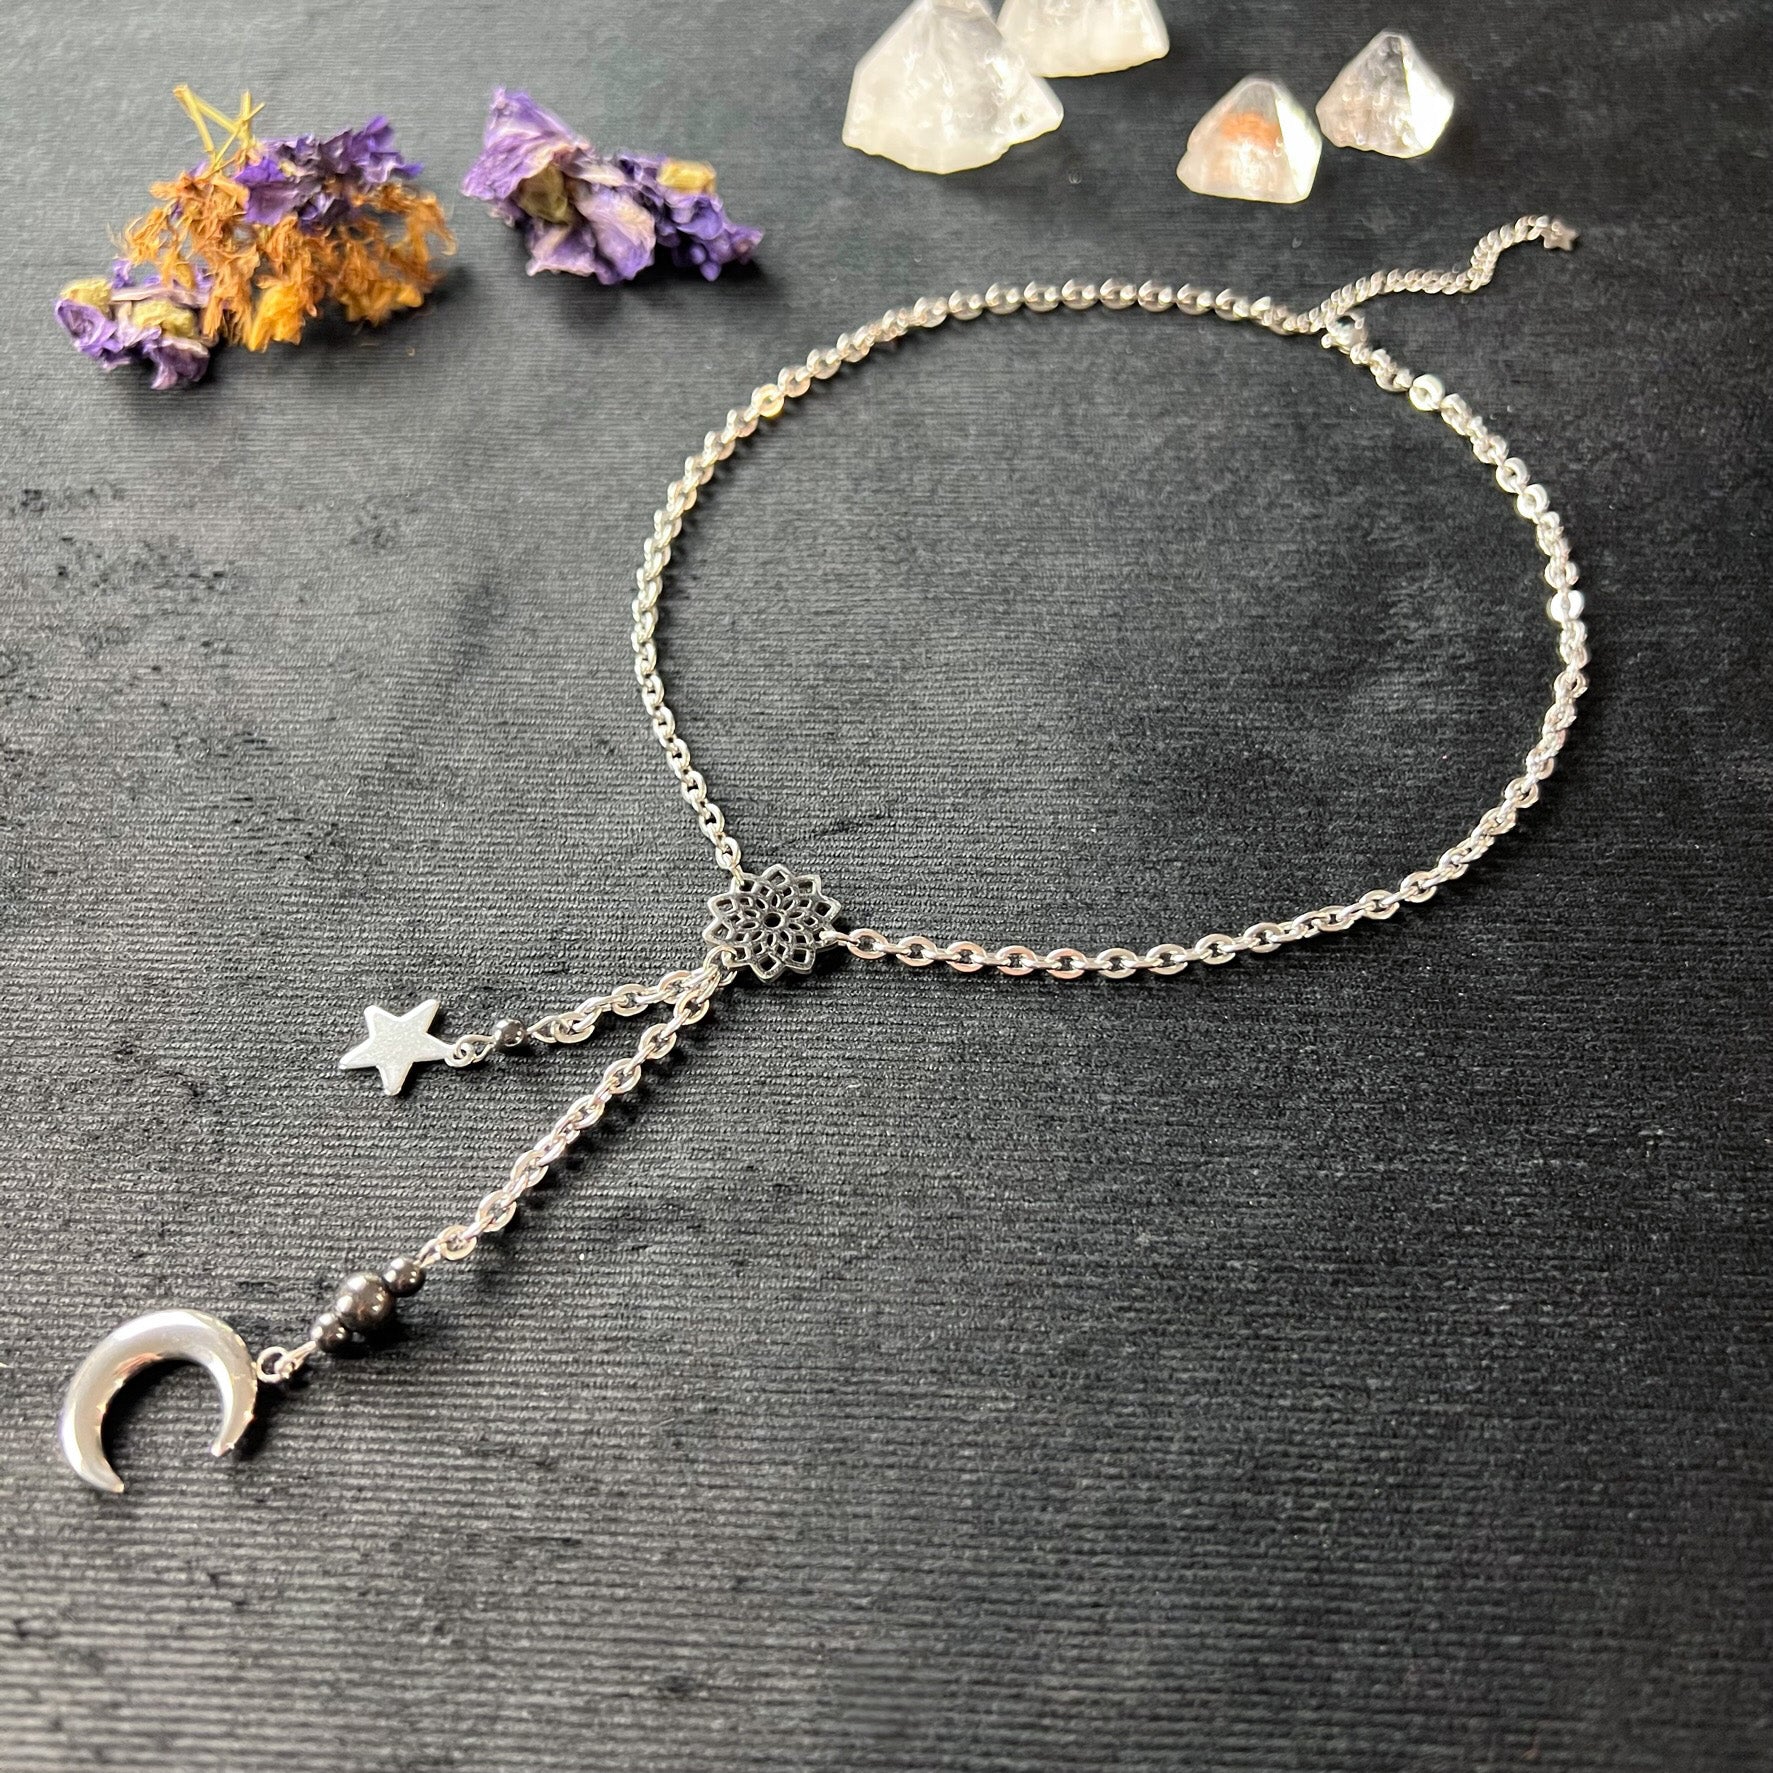 Celestial Y necklace stainless steel jewelry with star, mandala and crescent moon charm gothic necklace alternative jewelry